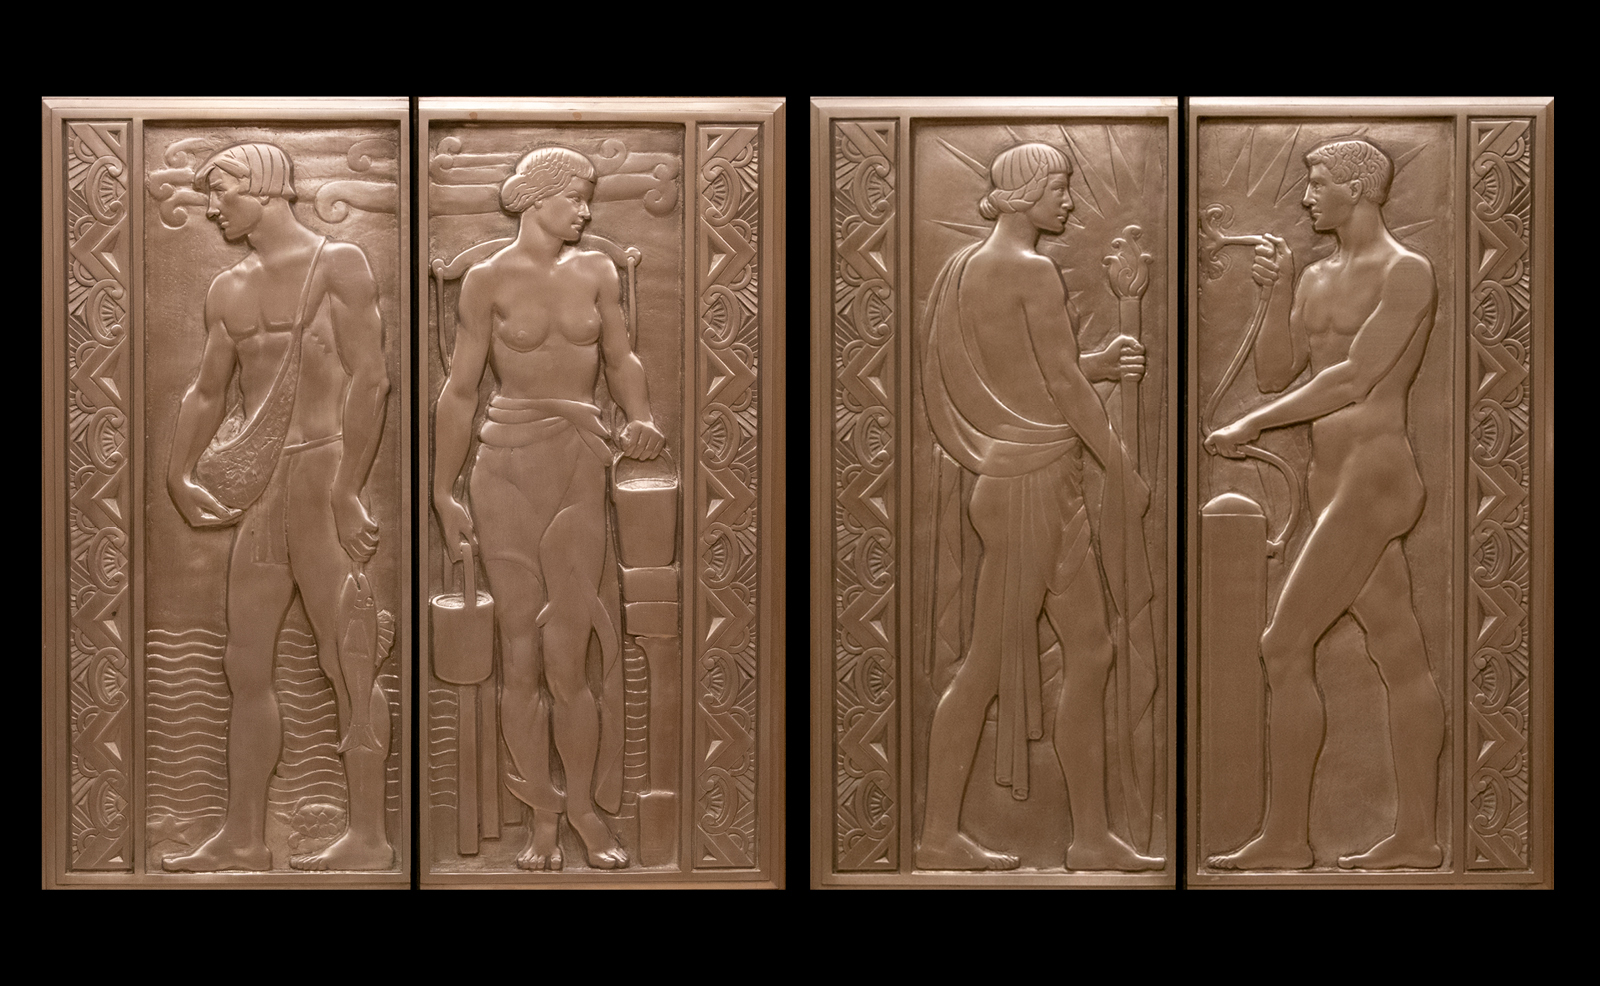 Image of a set of ornate, bronze elevator doors featuring male and female figures